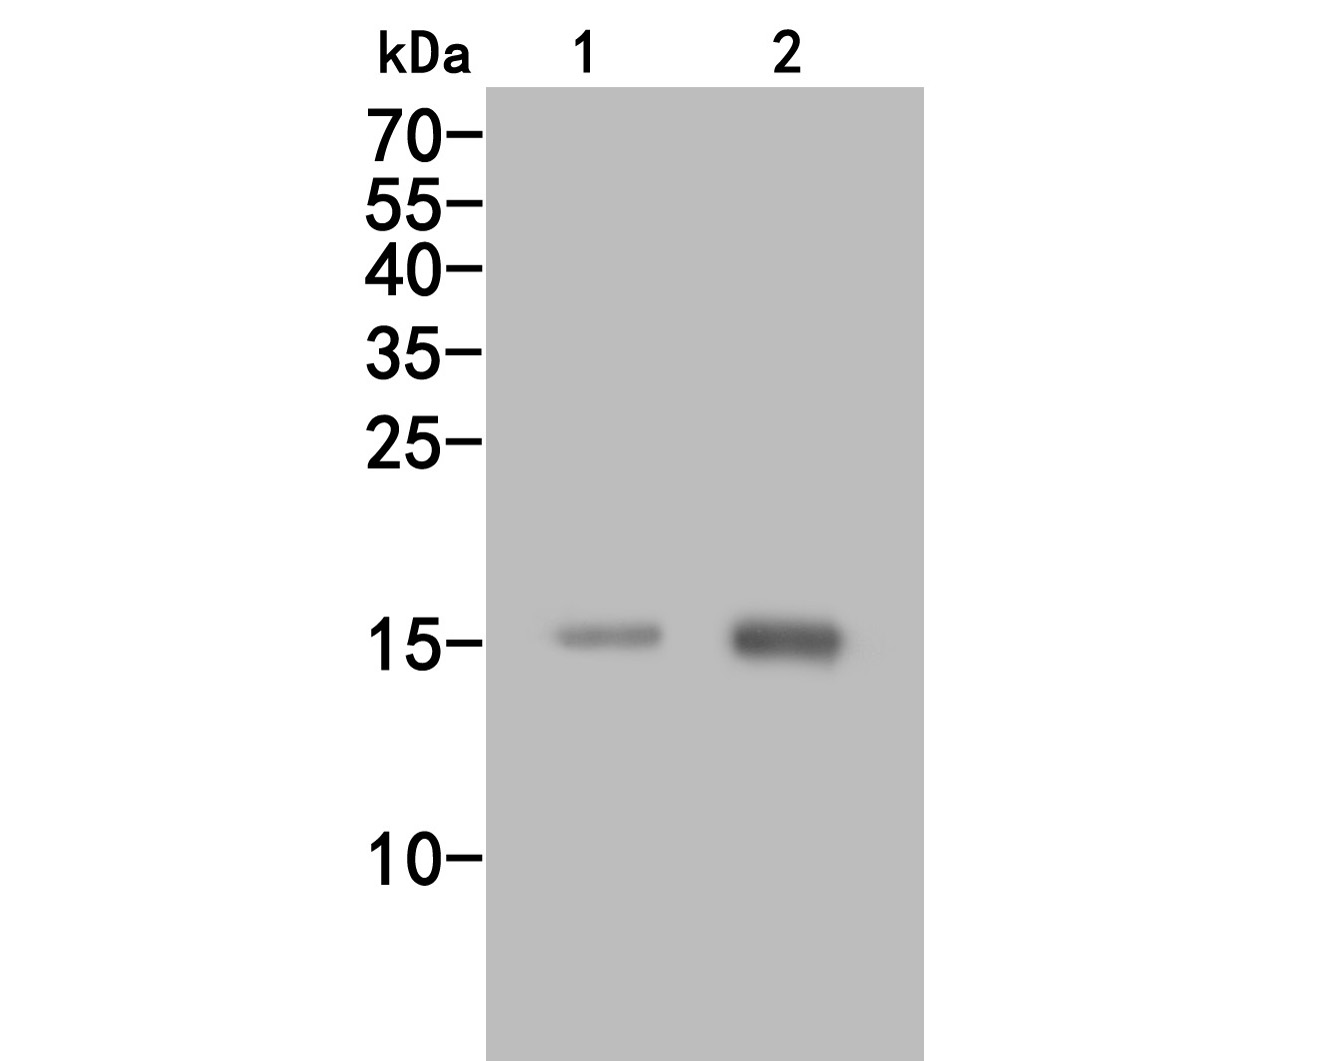 Western blot analysis of CCL2/MCP1 on different lysates. Proteins were transferred to a PVDF membrane and blocked with 5% BSA in PBS for 1 hour at room temperature. The primary antibody (HA500042, 1/500) was used in 5% BSA at room temperature for 2 hours. Goat Anti-Rabbit IgG - HRP Secondary Antibody (HA1001) at 1:5,000 dilution was used for 1 hour at room temperature.<br />
Positive control: <br />
Lane 1: A549 cell lysate<br />
Lane 2: Hela cell lysate